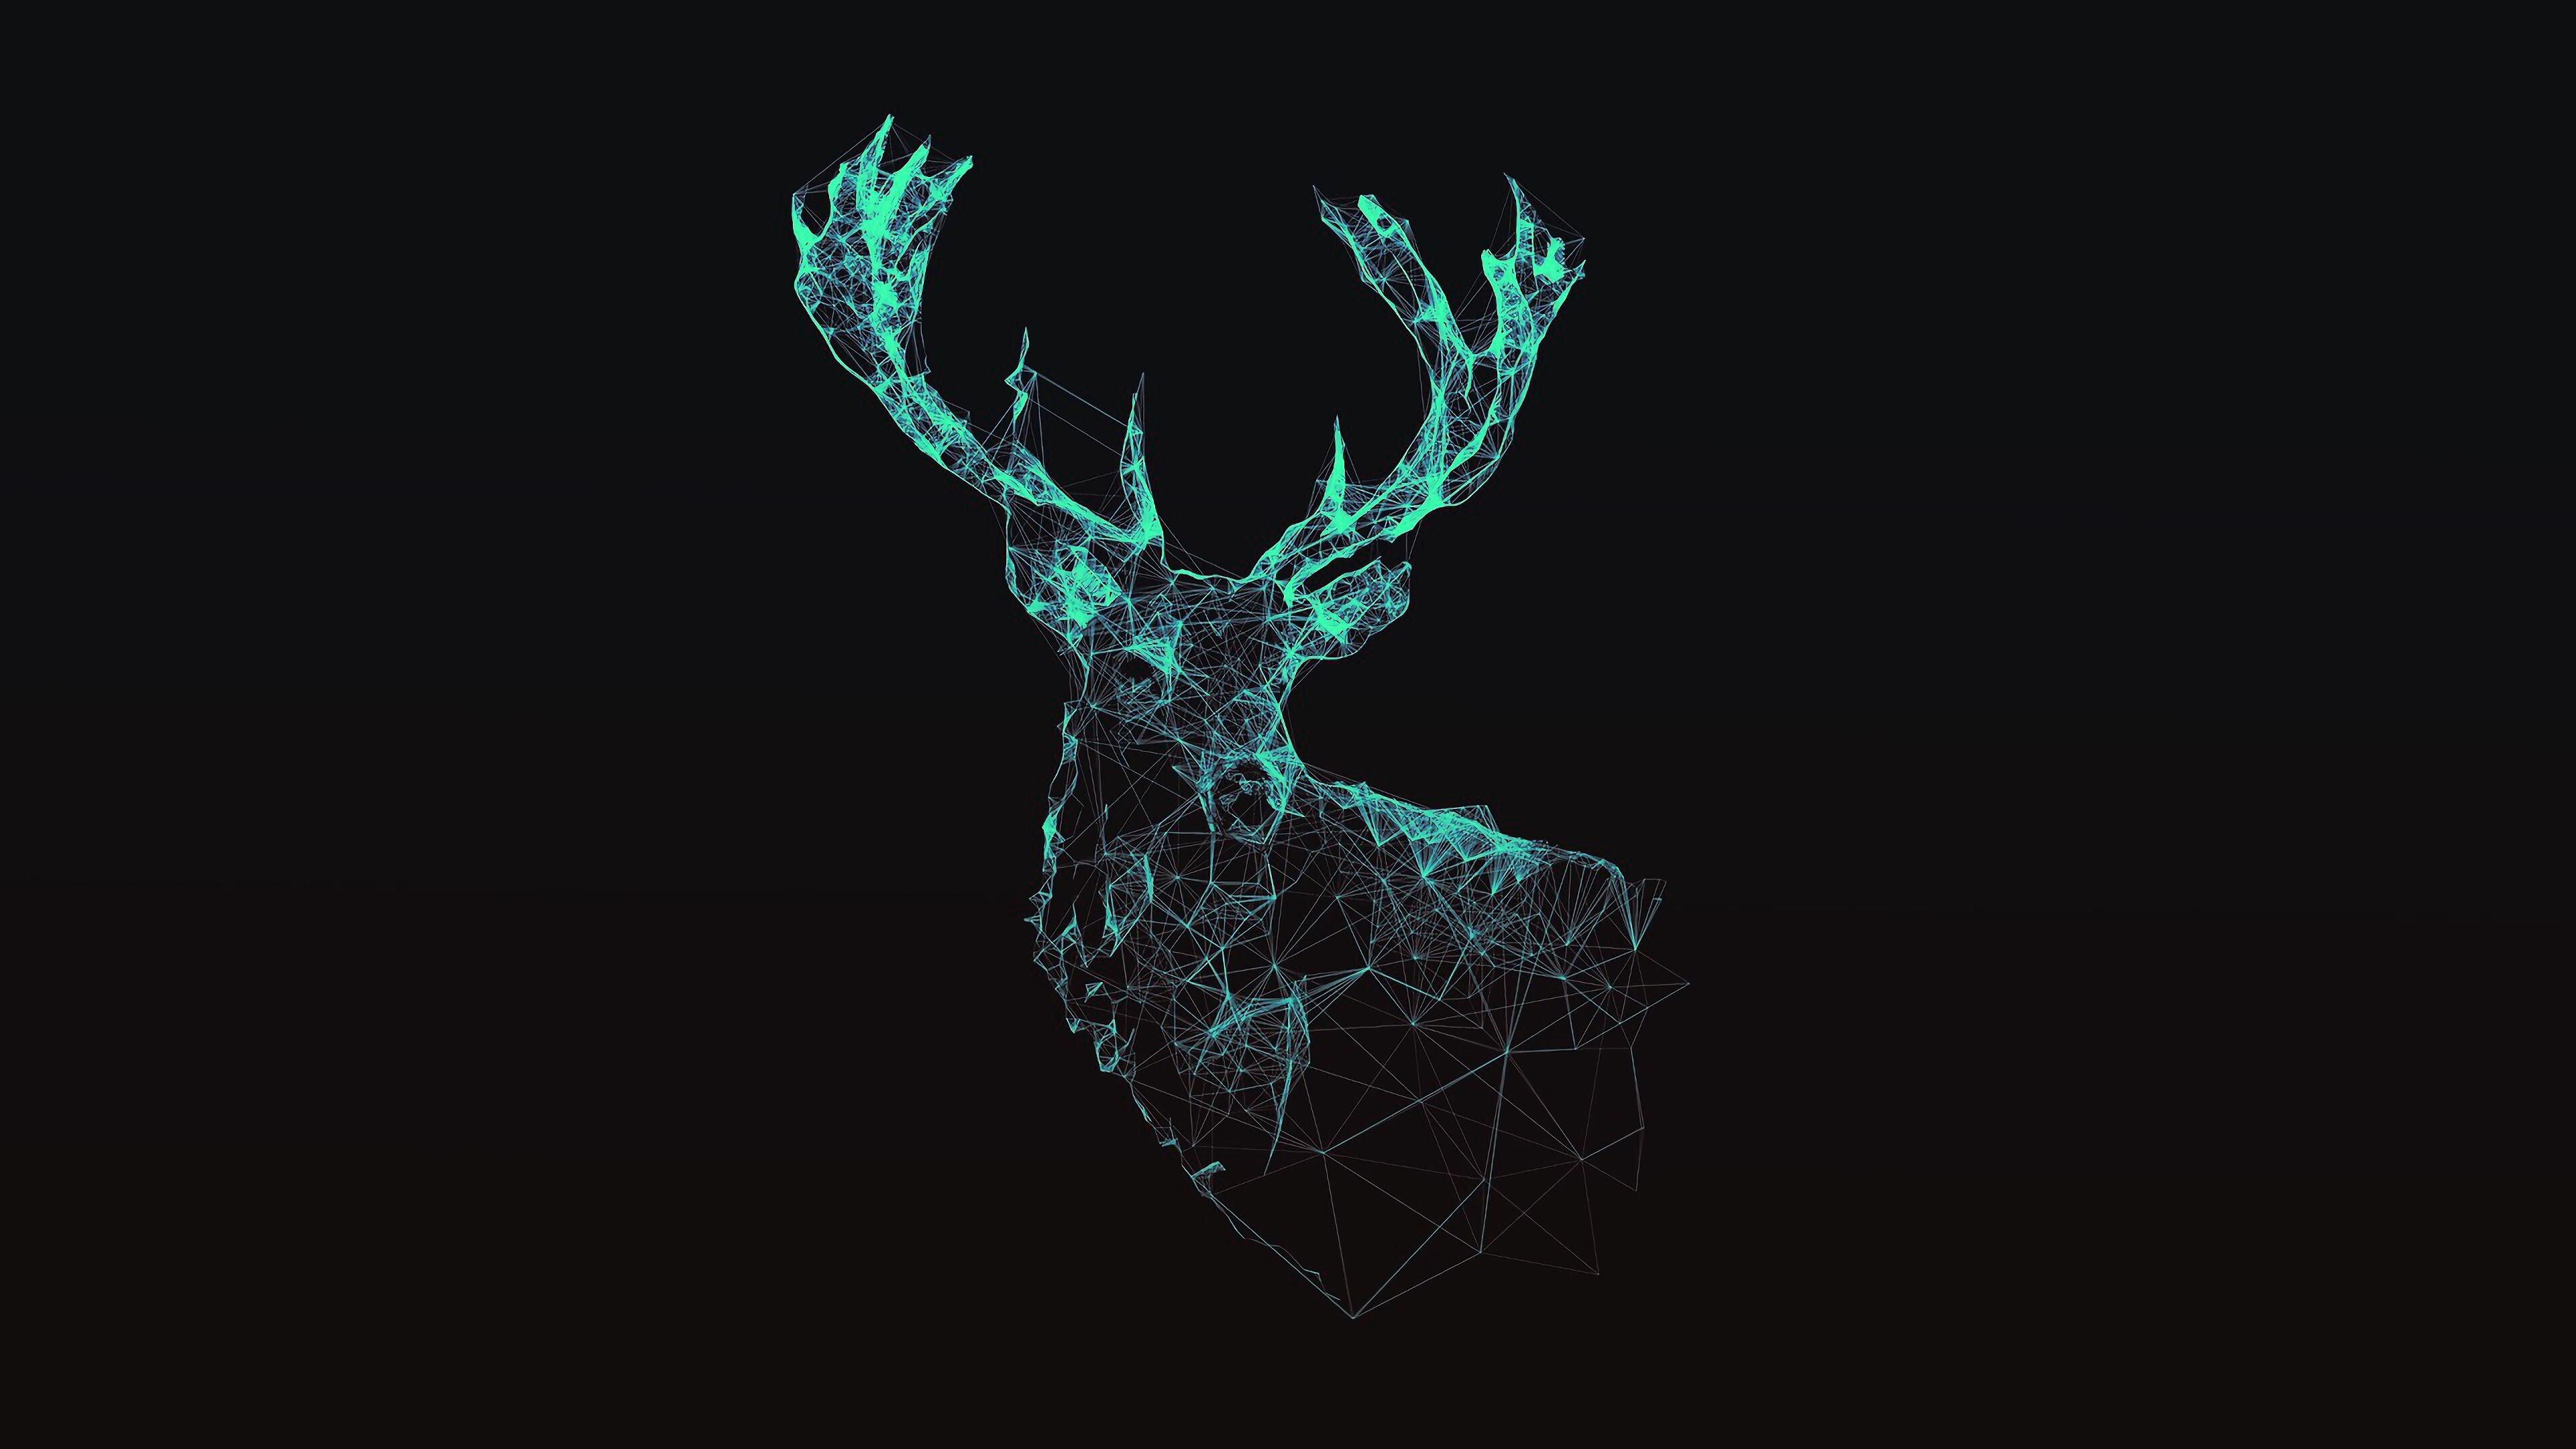 Geometric Animal: Minimalism, Deer painting, Abstract, Vector drawing, Ornament. 3840x2160 4K Background.